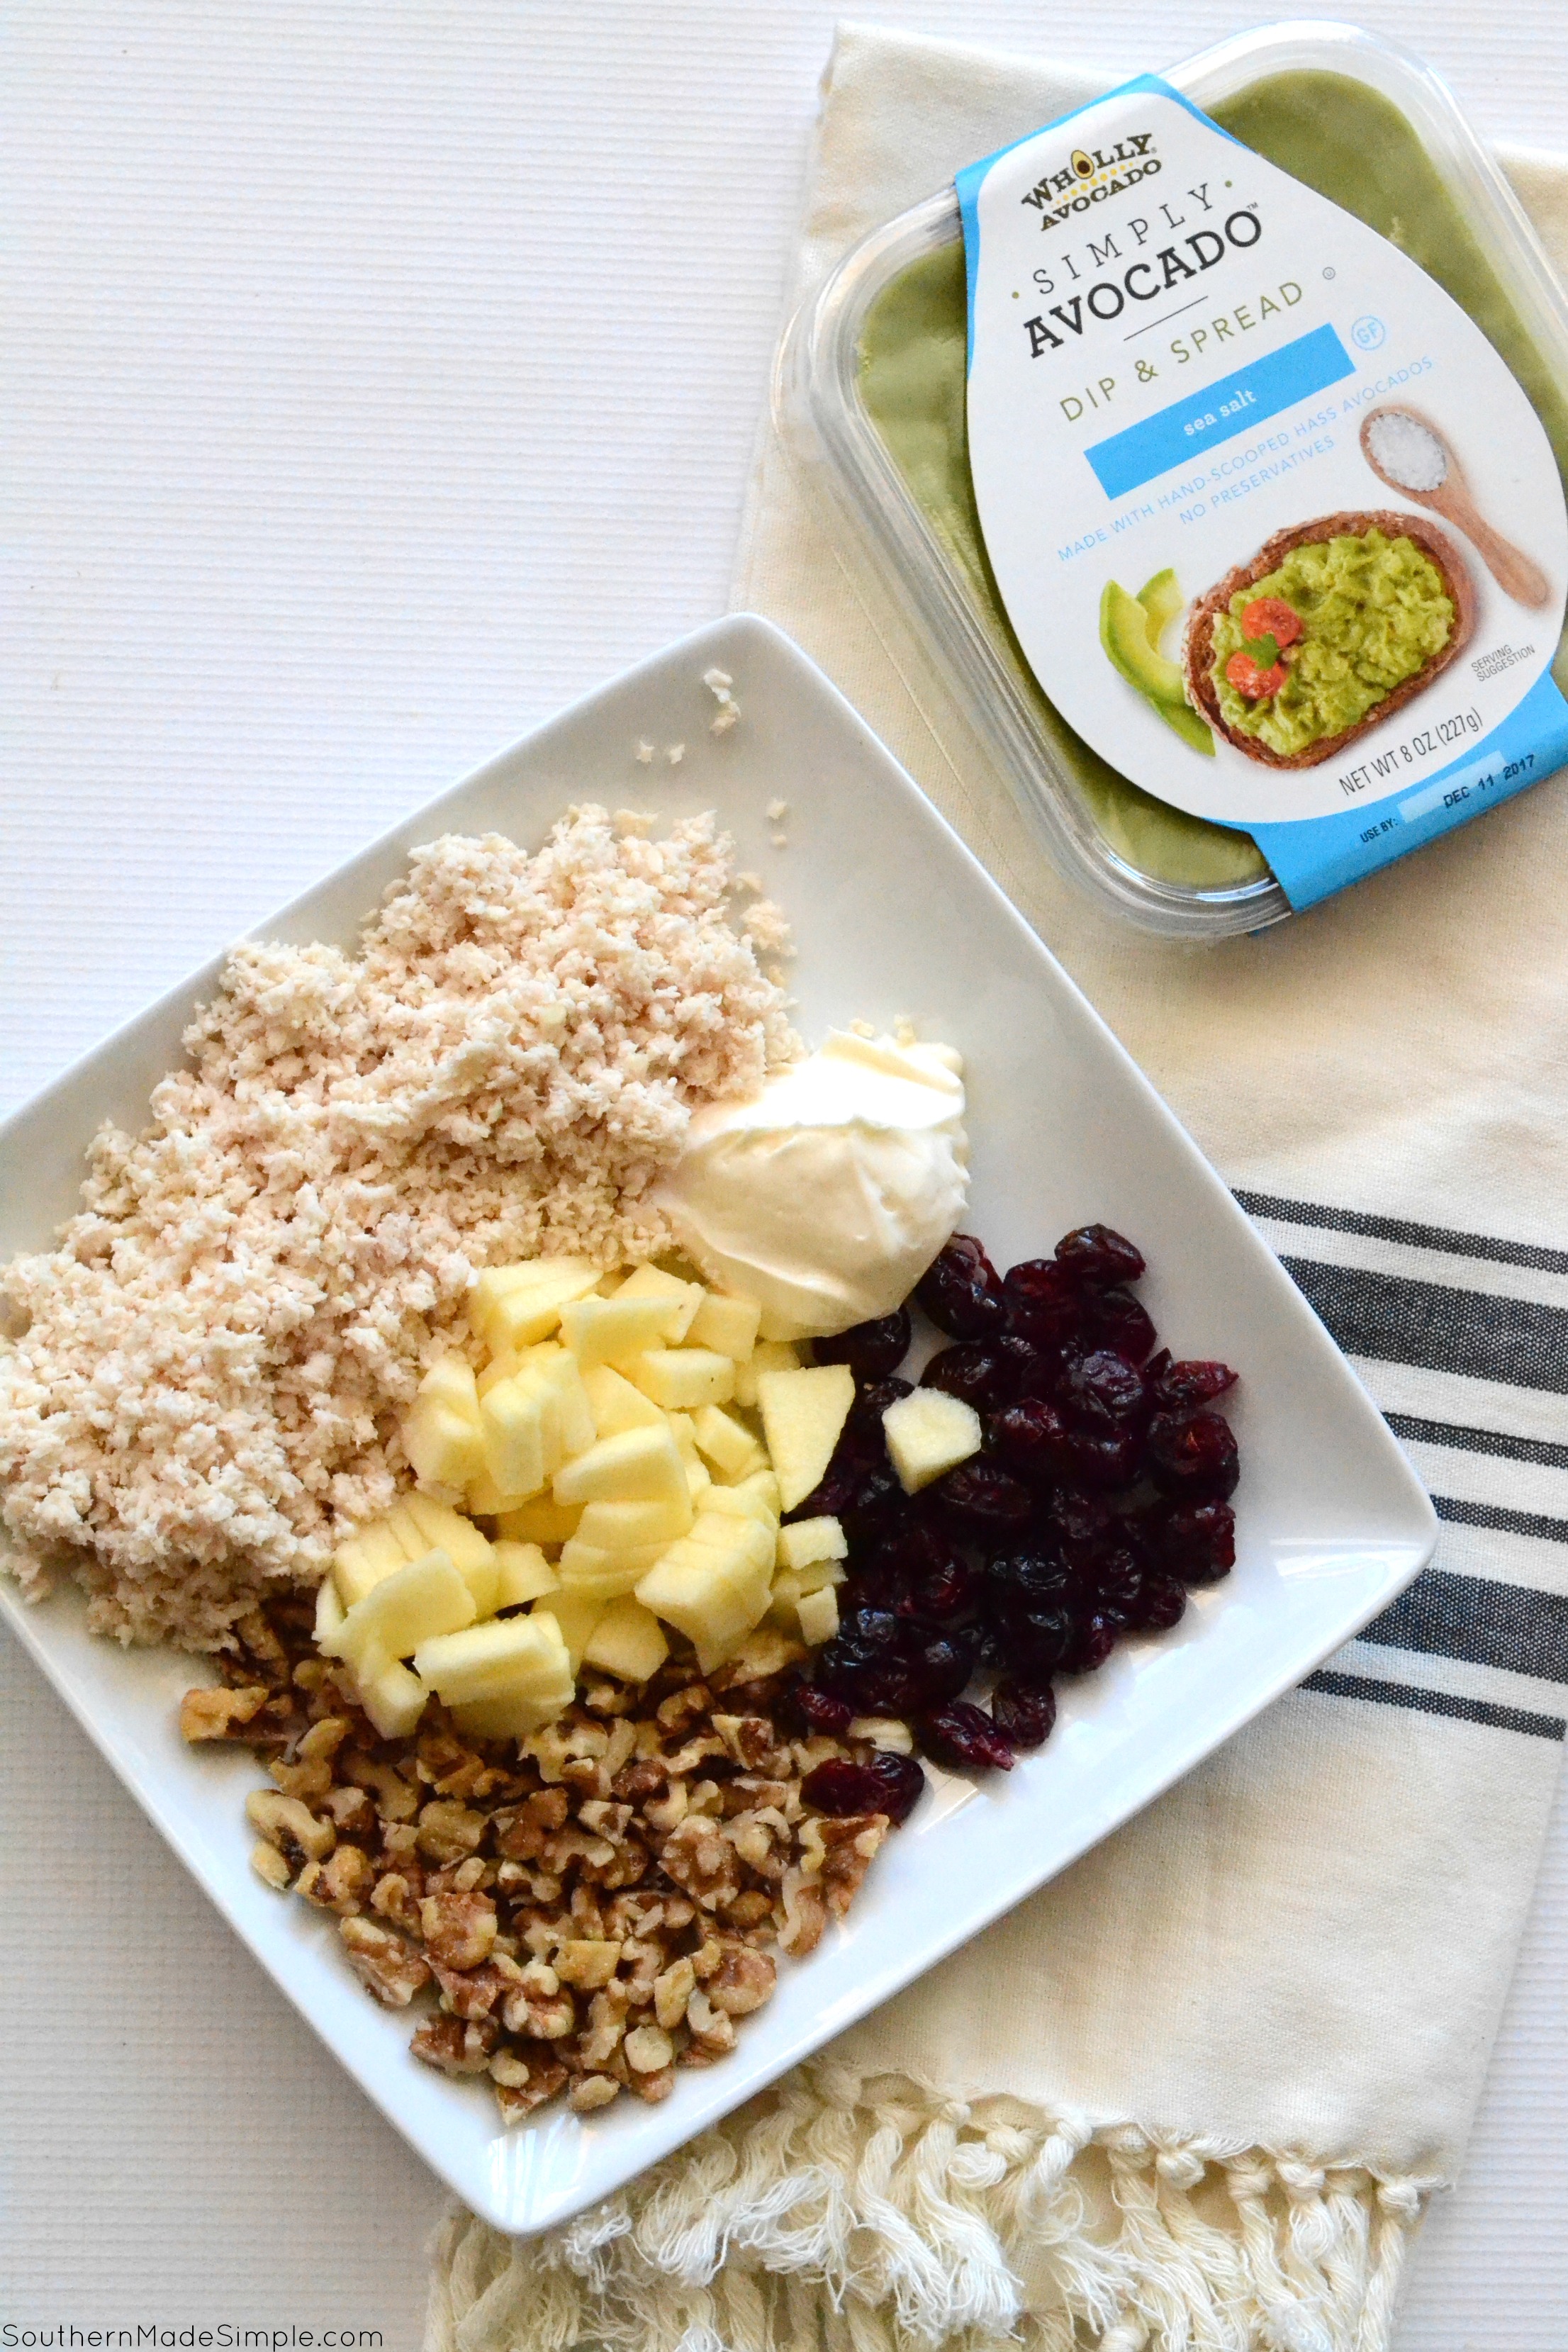 Need a quick and easy mid-day snack or a simple lunch on the go packed with goodness? This recipe for Cranberry-Avocado Chicken Salad is light, delicious and can come together in just a few minutes! Serve it on apple slices, with crackers, in a tortilla or on bread, the possibilities are endless! #SimplyAvocado #Ad